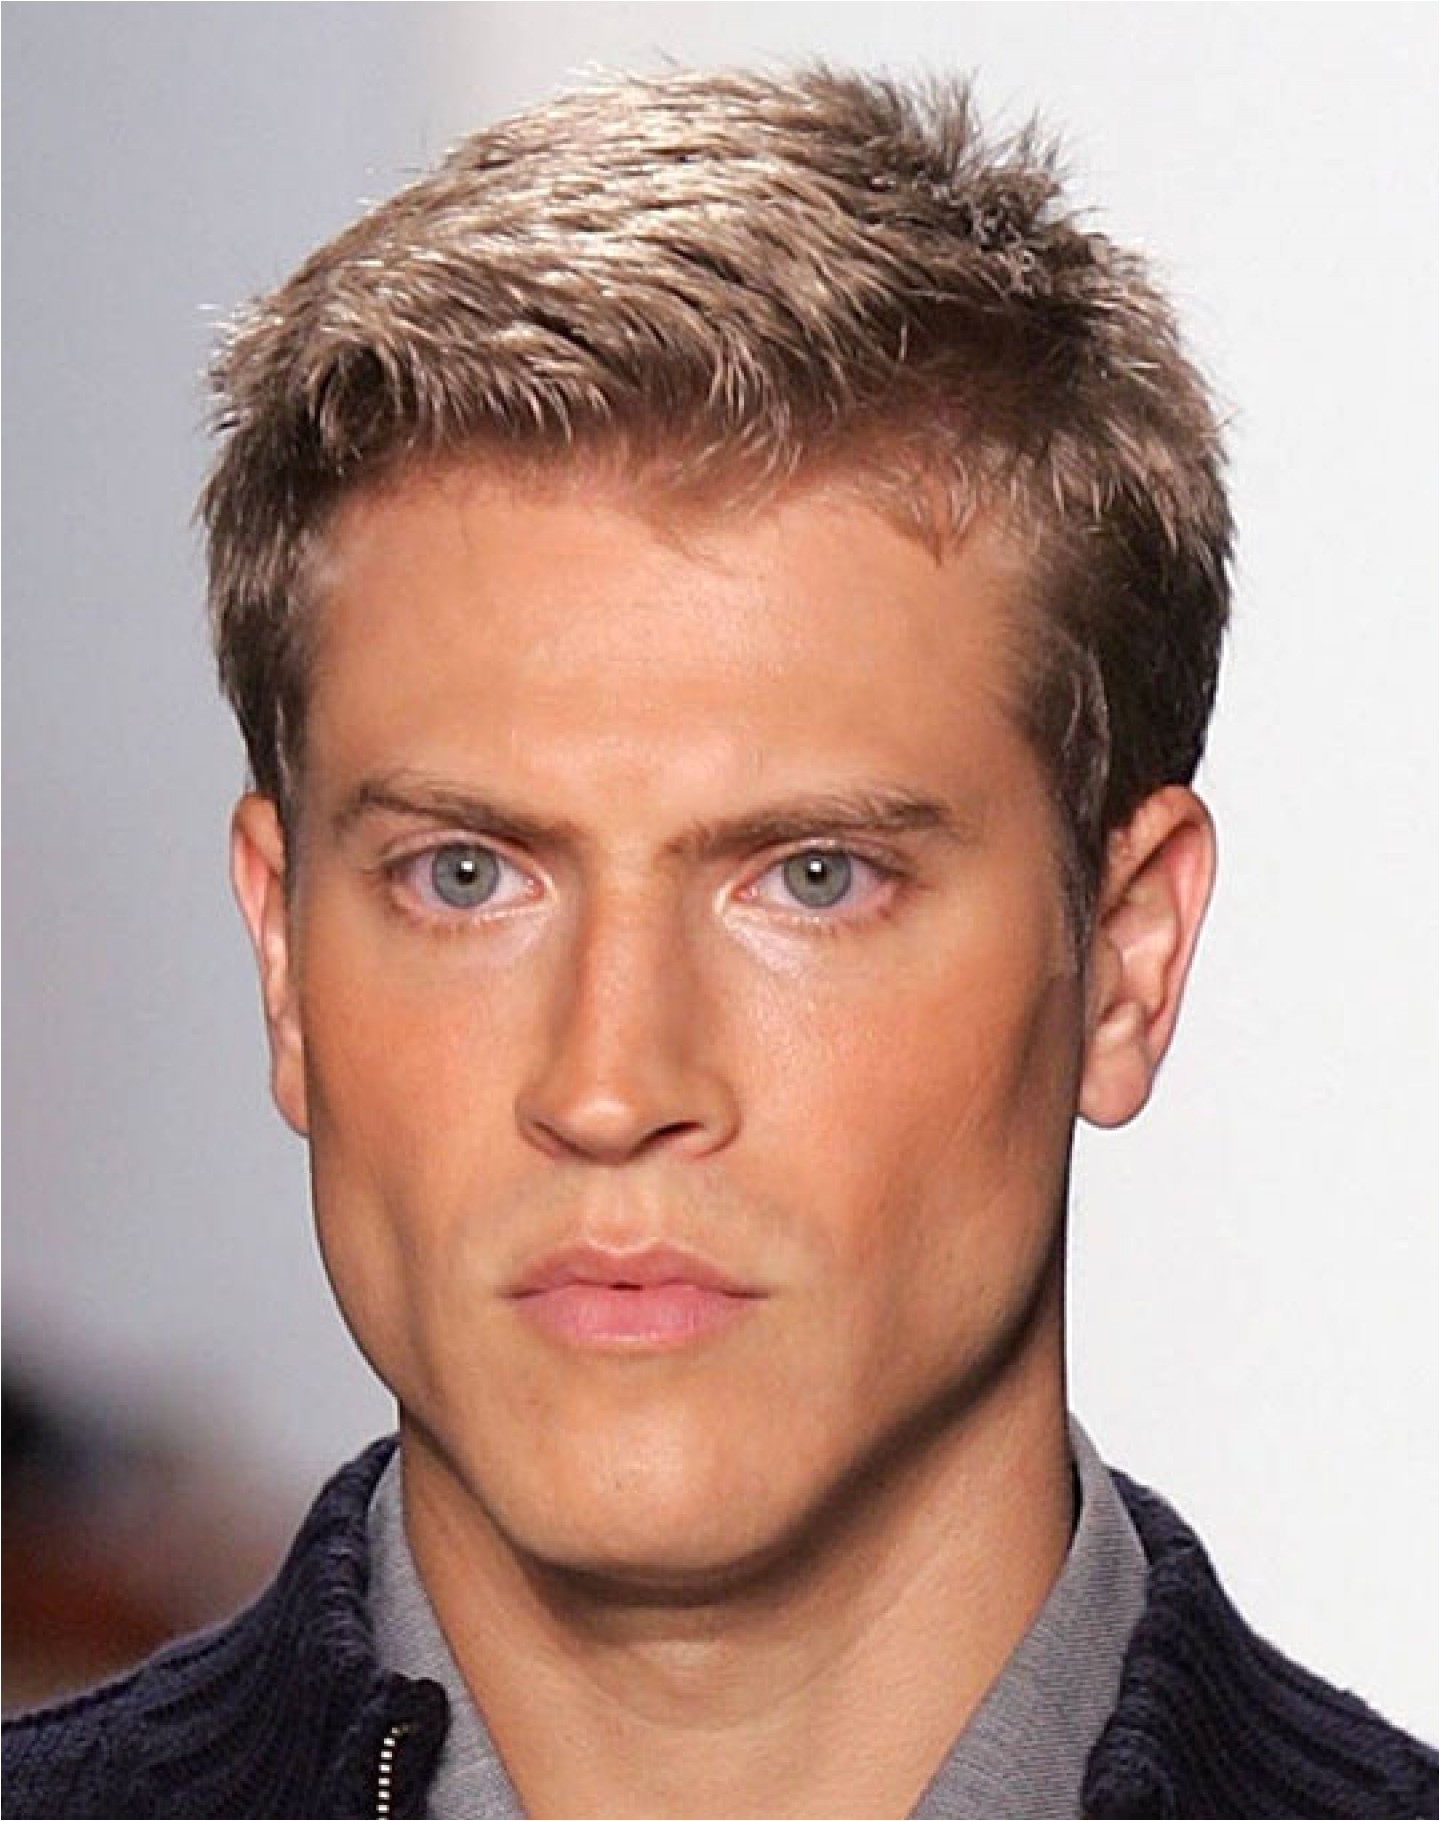 Hairstyles for Men Pic 5 Excellent Stylish Mens Haircuts